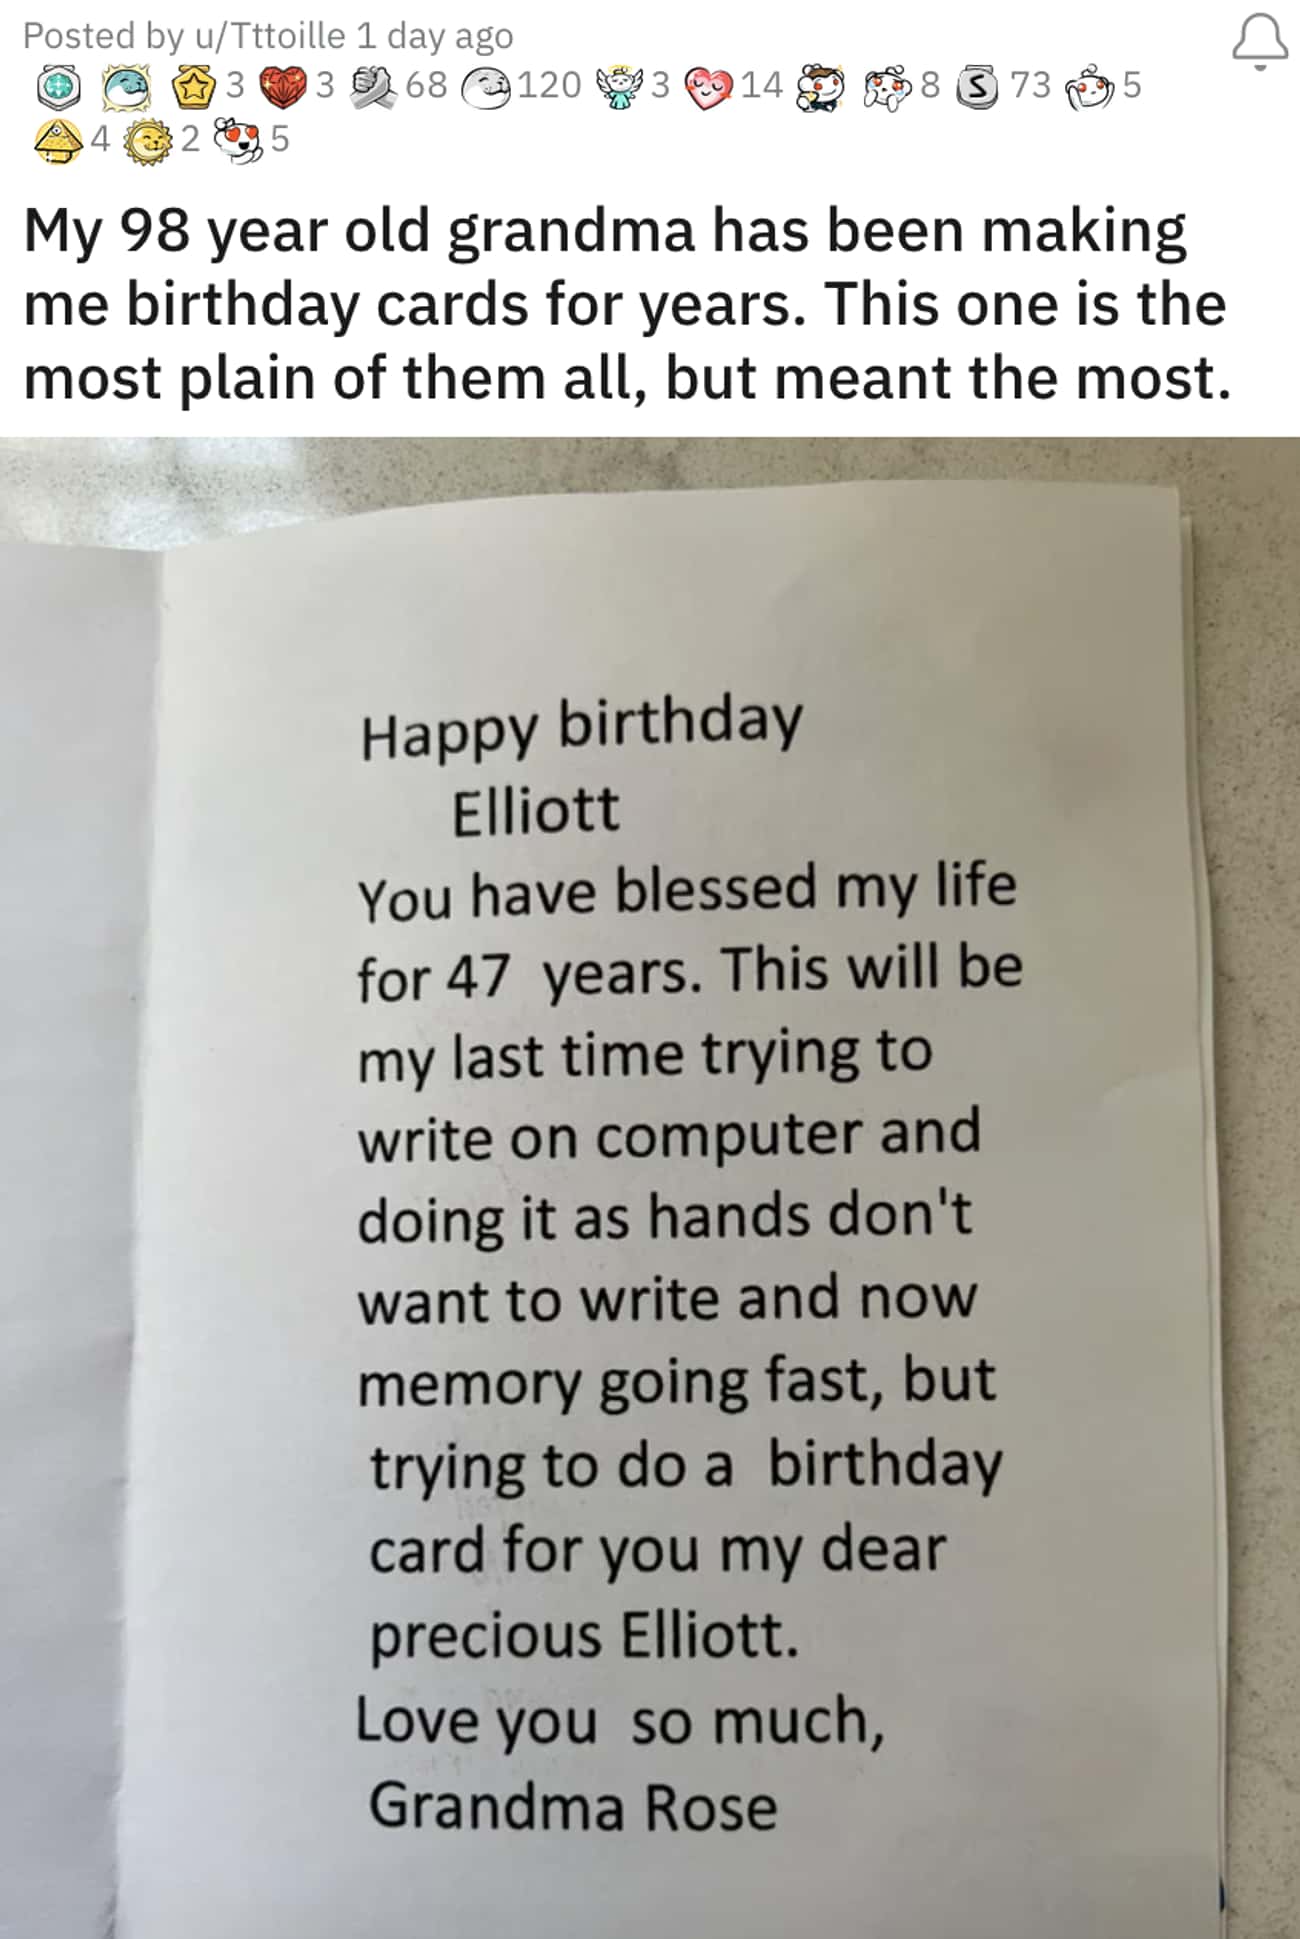 A 98-Year-Old Grandmother's Birthday Card To Her Grandson